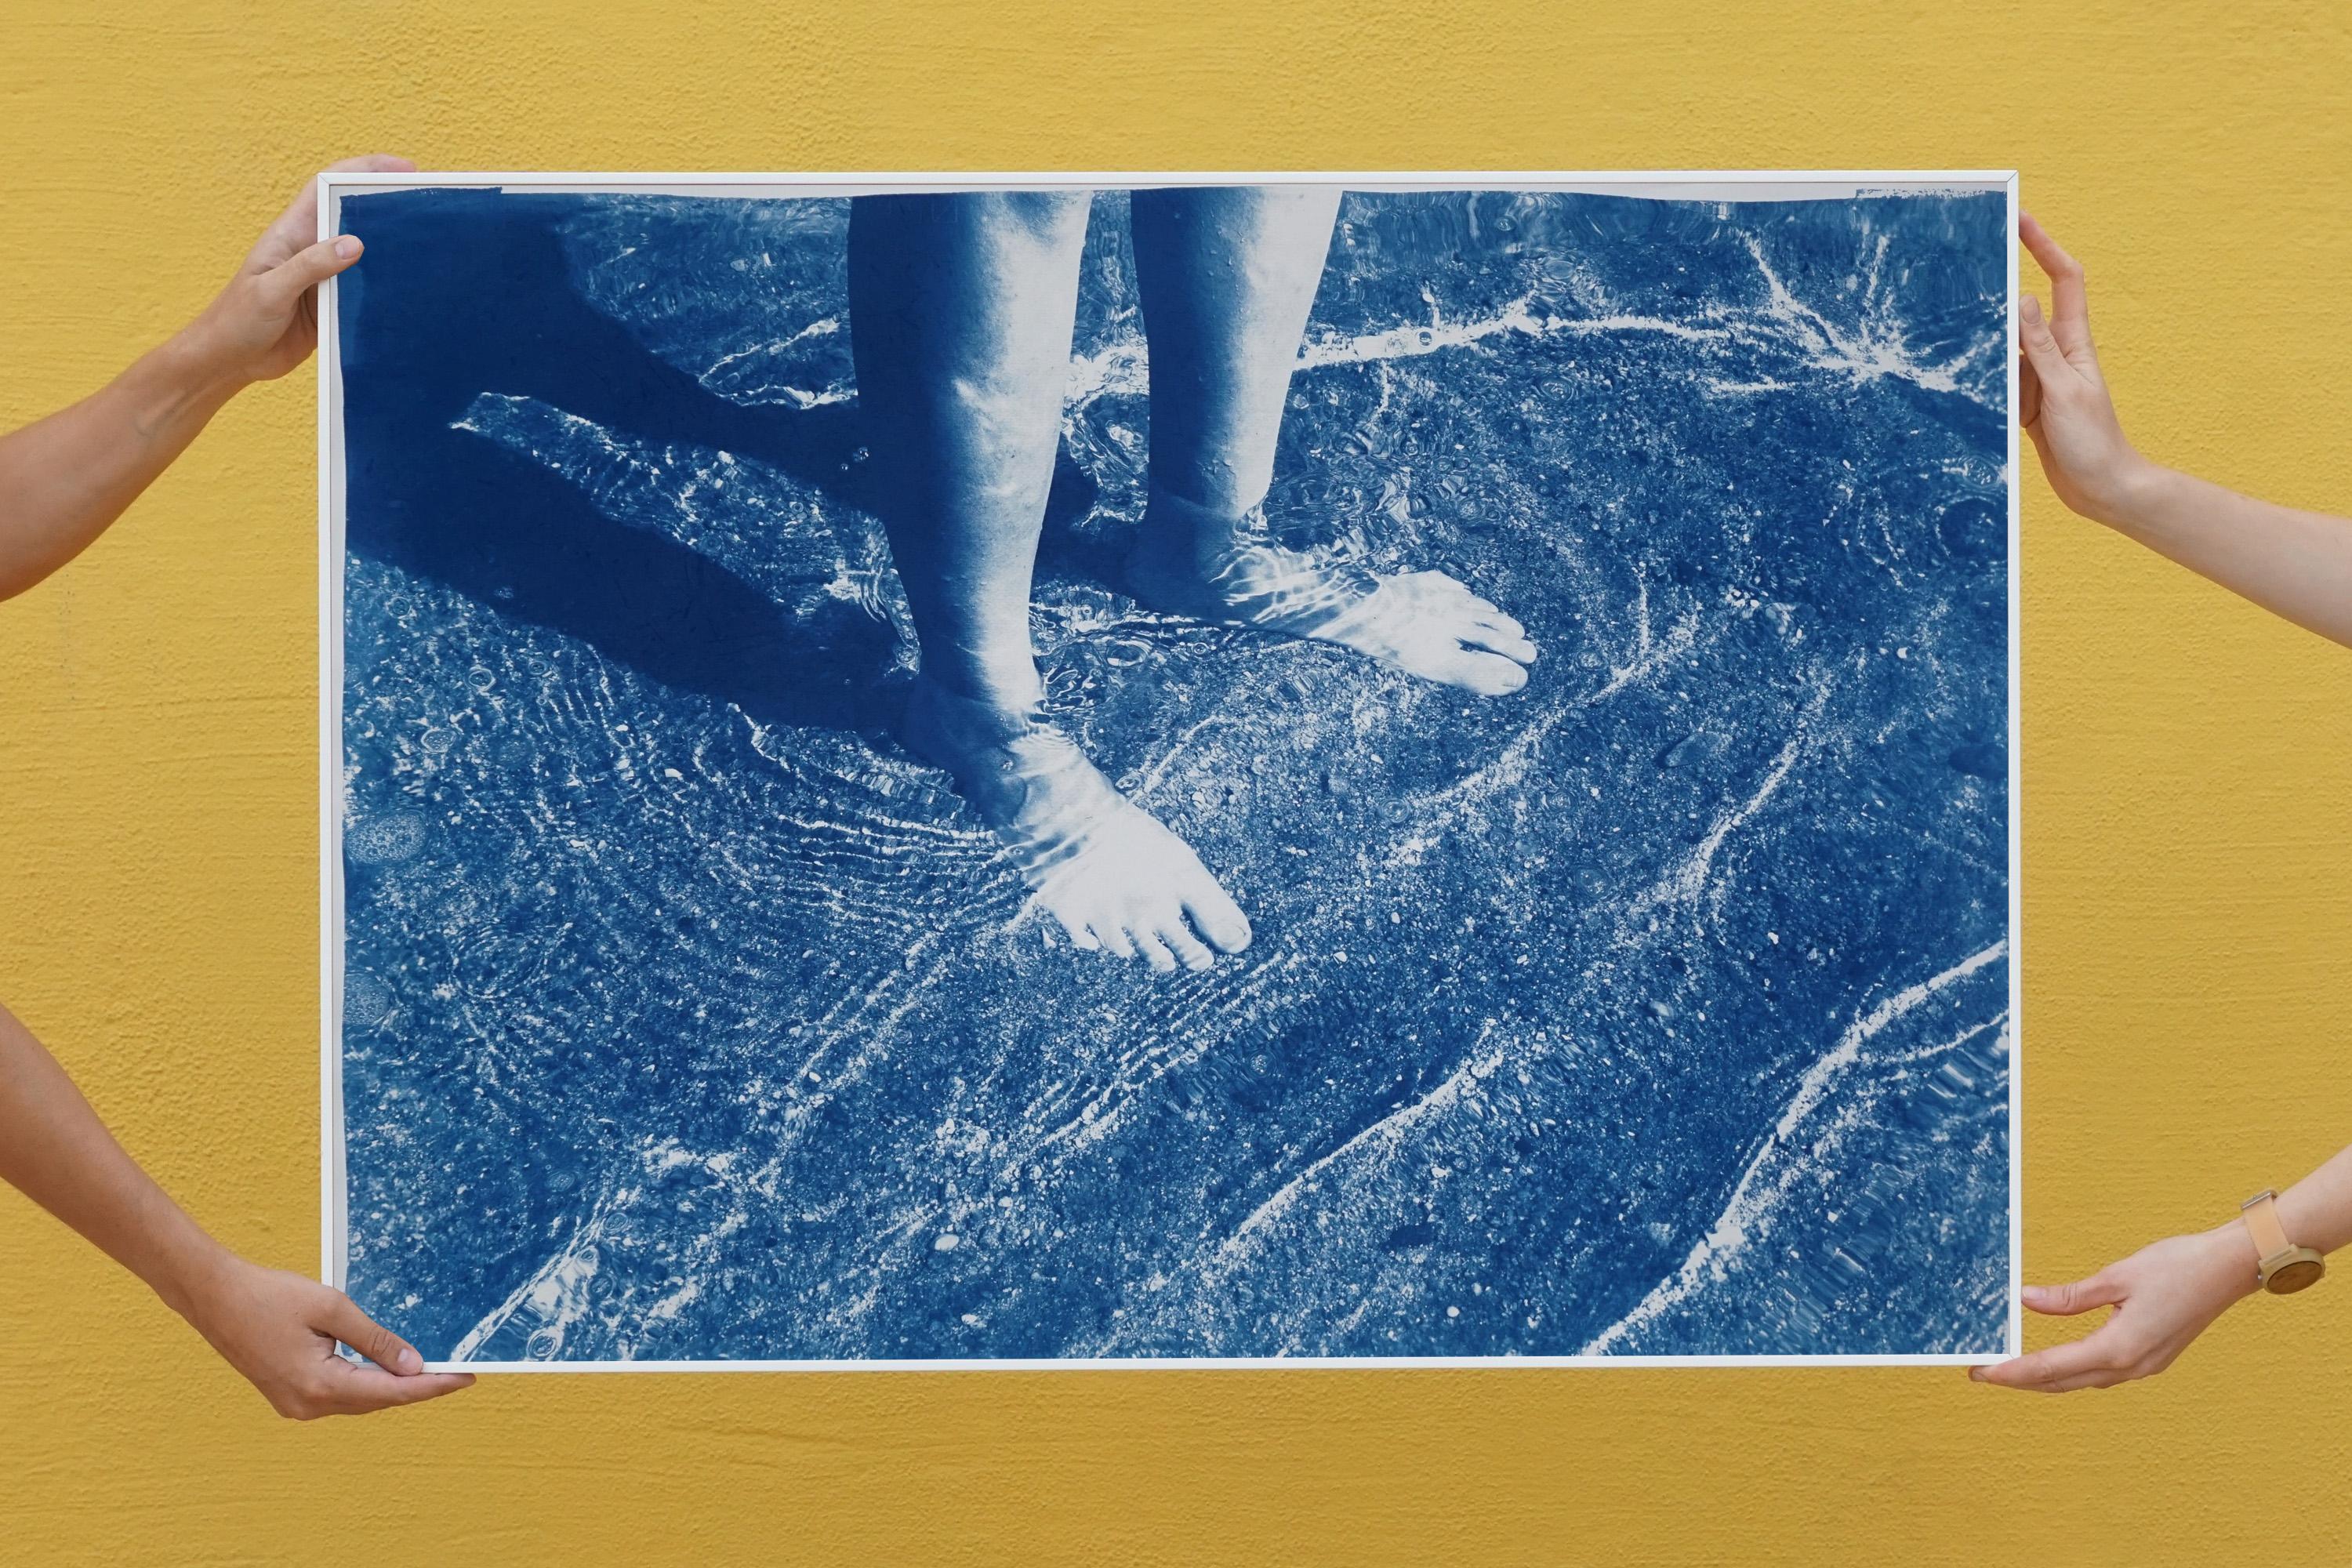 This is an exclusive handprinted limited edition cyanotype.
